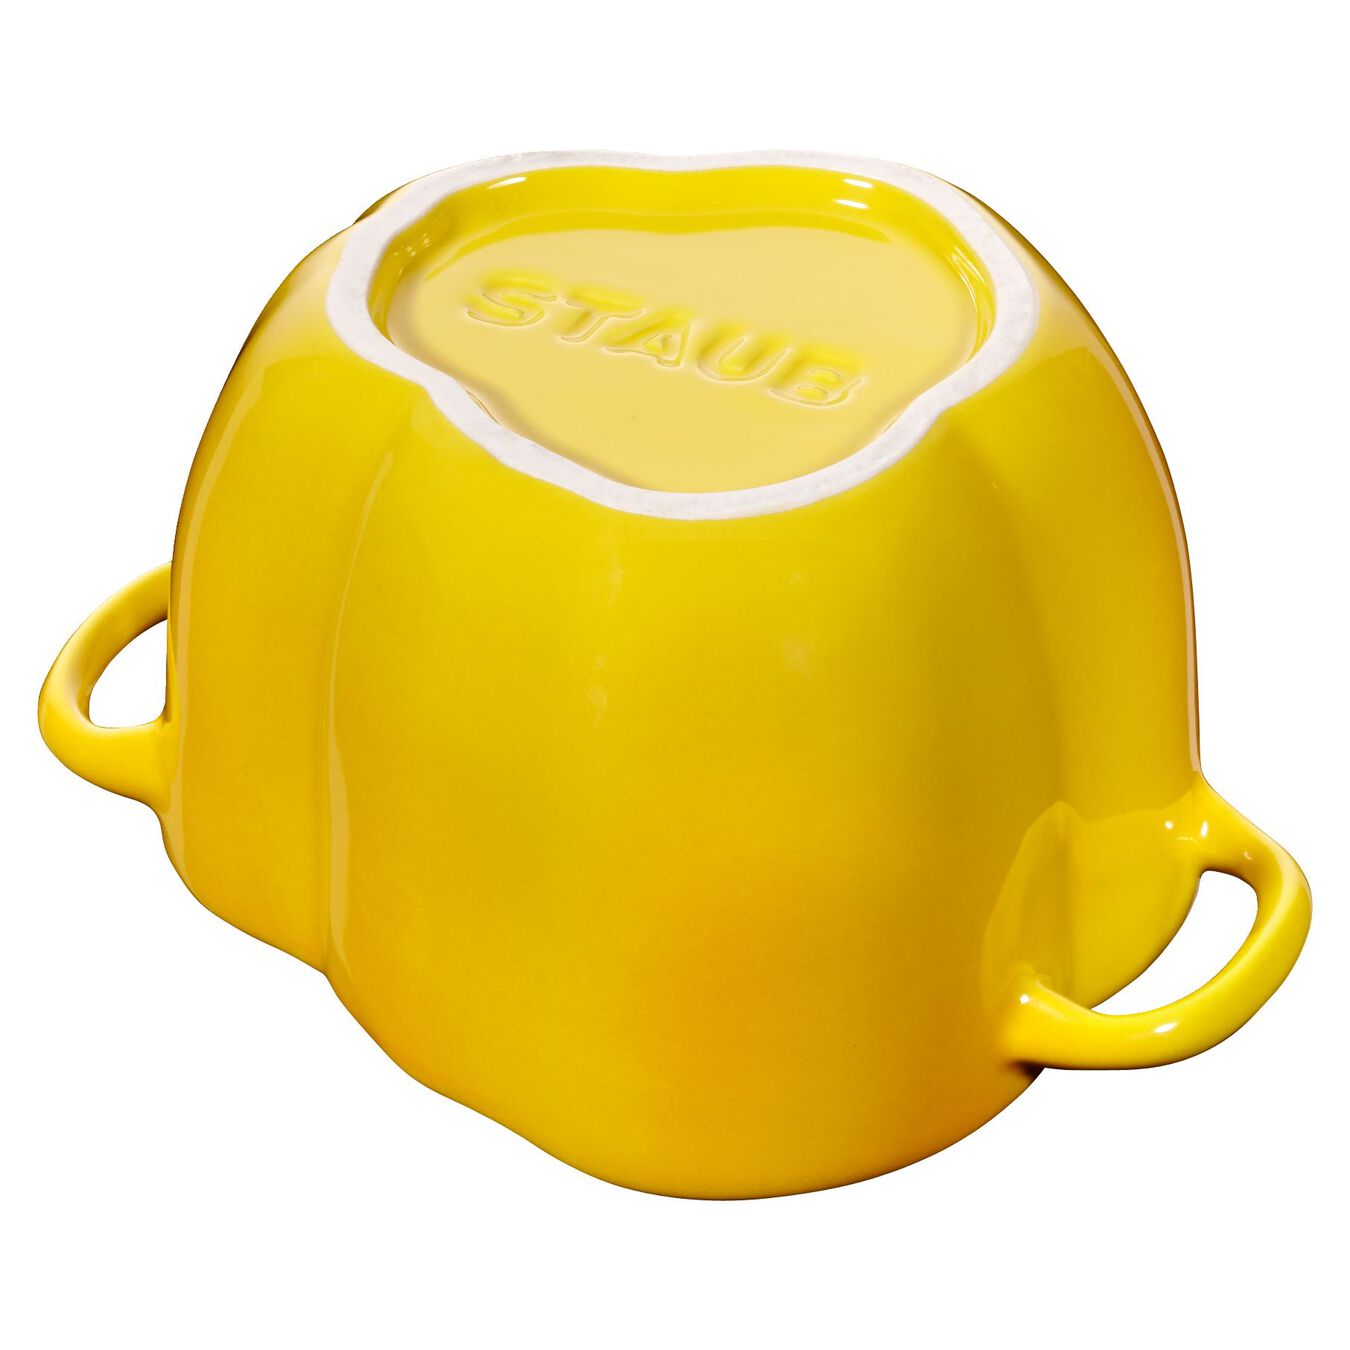 450 ml ceramic pepper Cocotte, yellow,,large 3